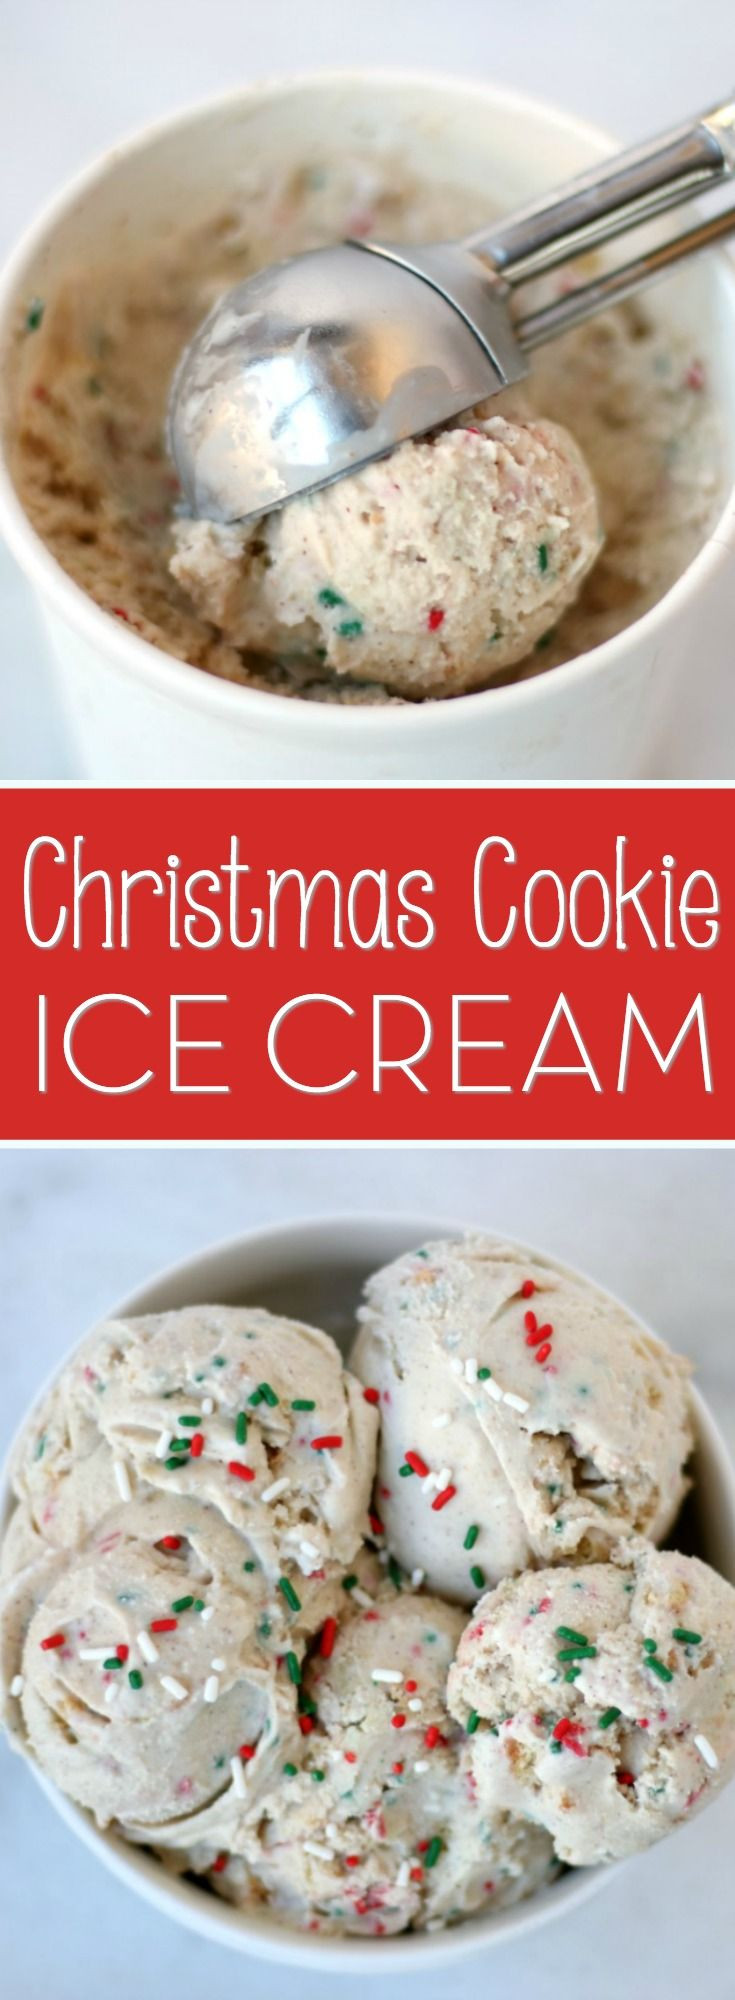 Christmas Cookies Ice Cream
 1000 ideas about Cups on Pinterest